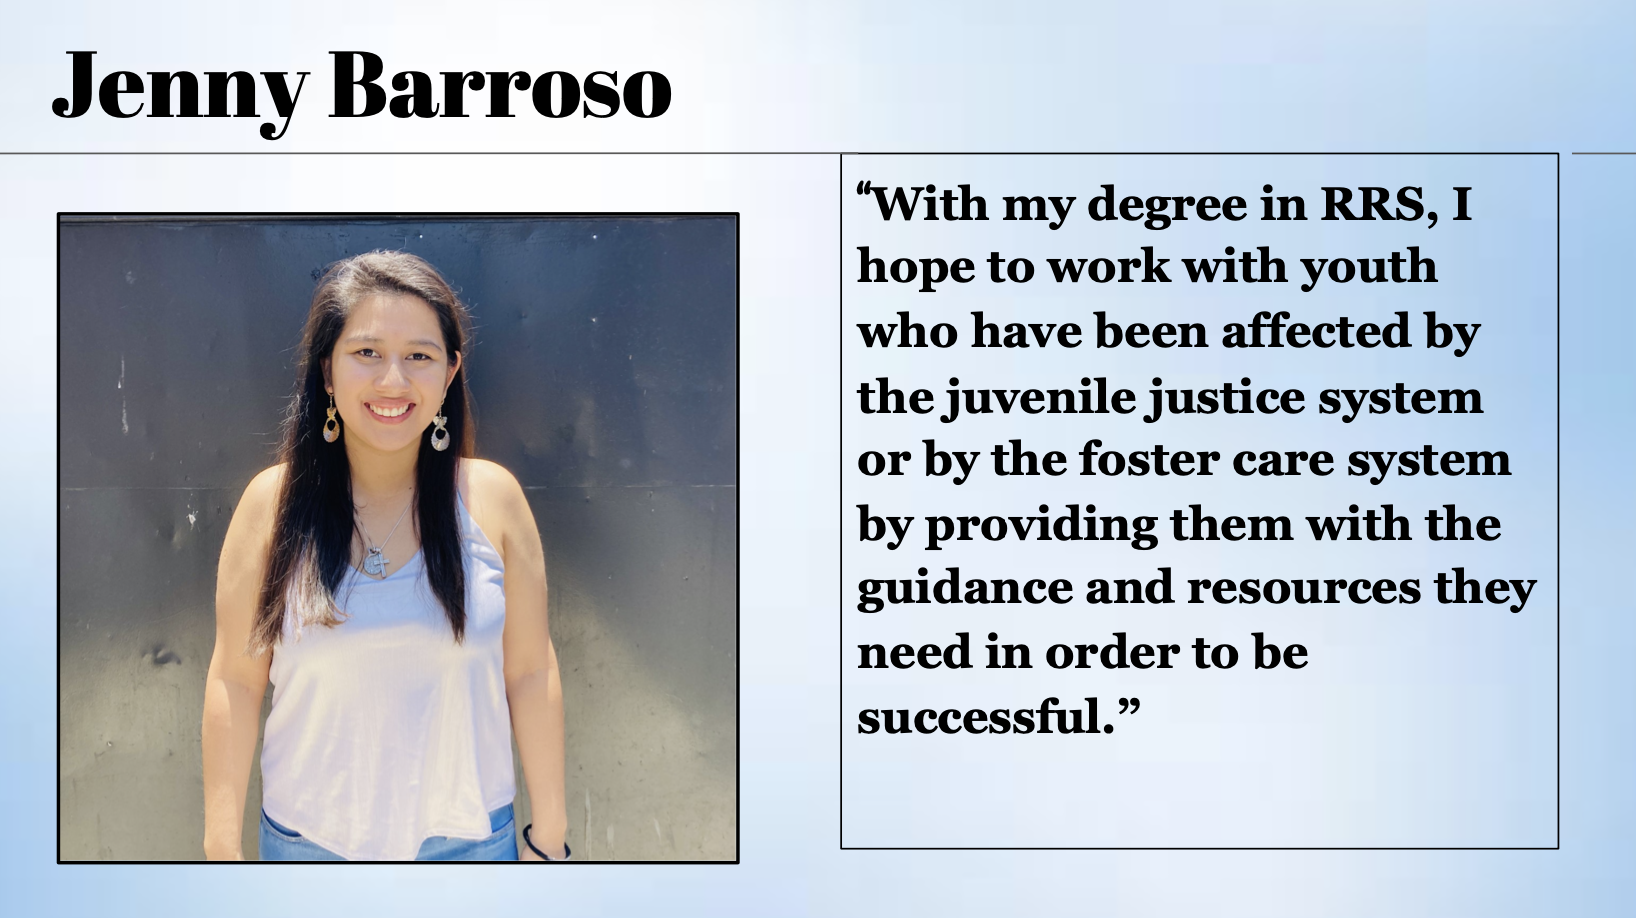 Jenny Farroso  hopes to work with youth who have been affected by the juvenile justice system or by the foster care system with her RRS degree.